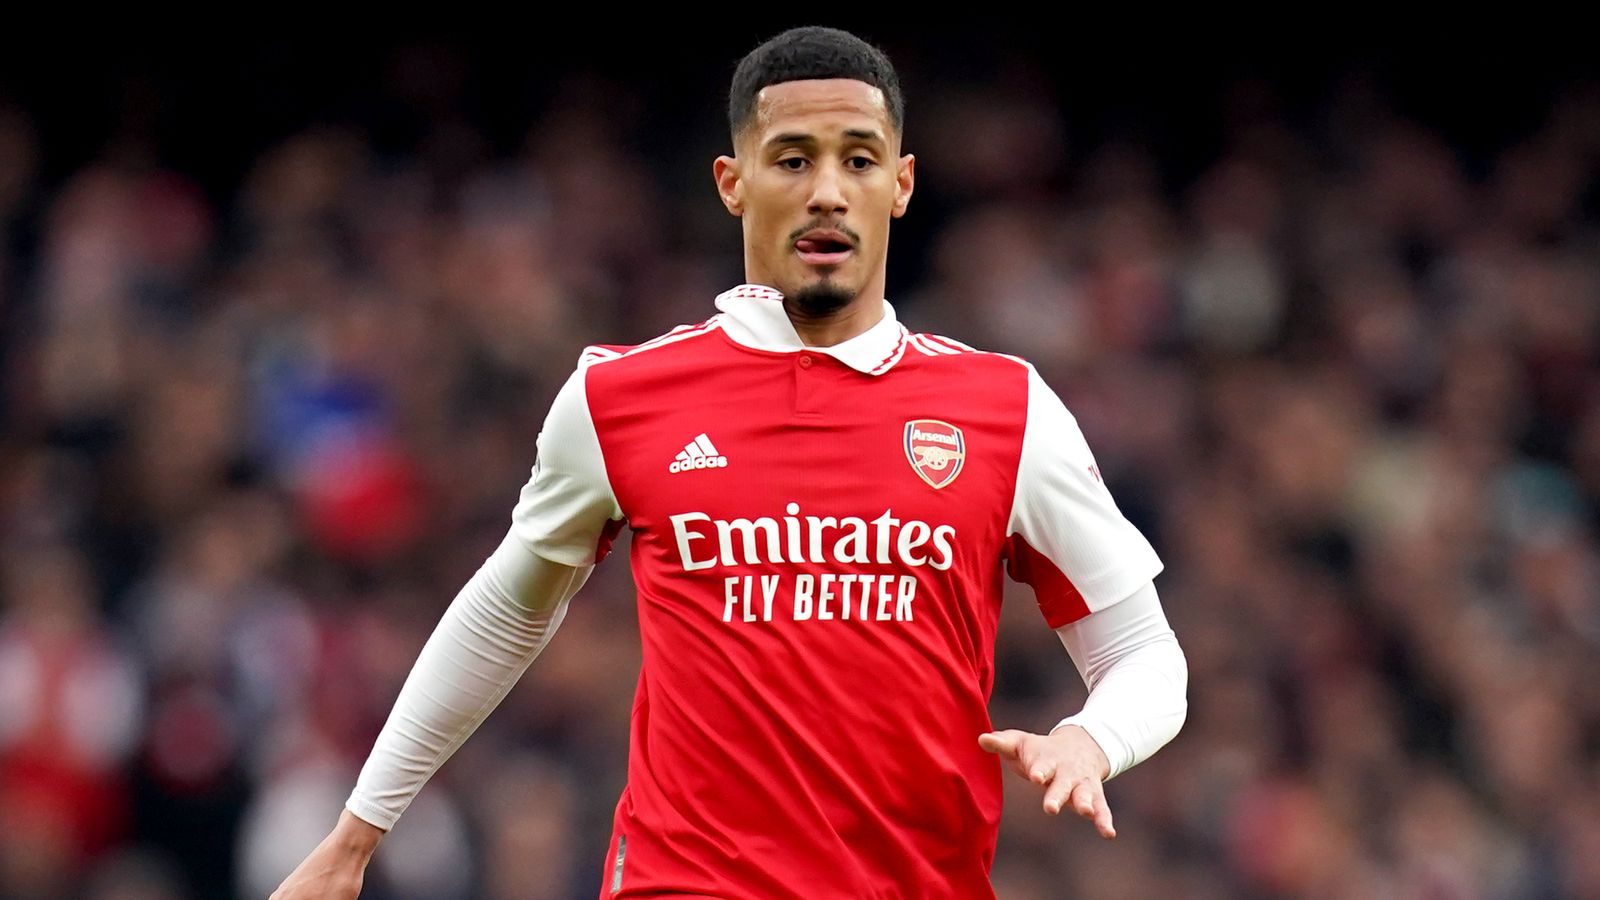 William Saliba agrees new Arsenal contract in principle: Defender to pen new four-year deal at Emirates | Football News